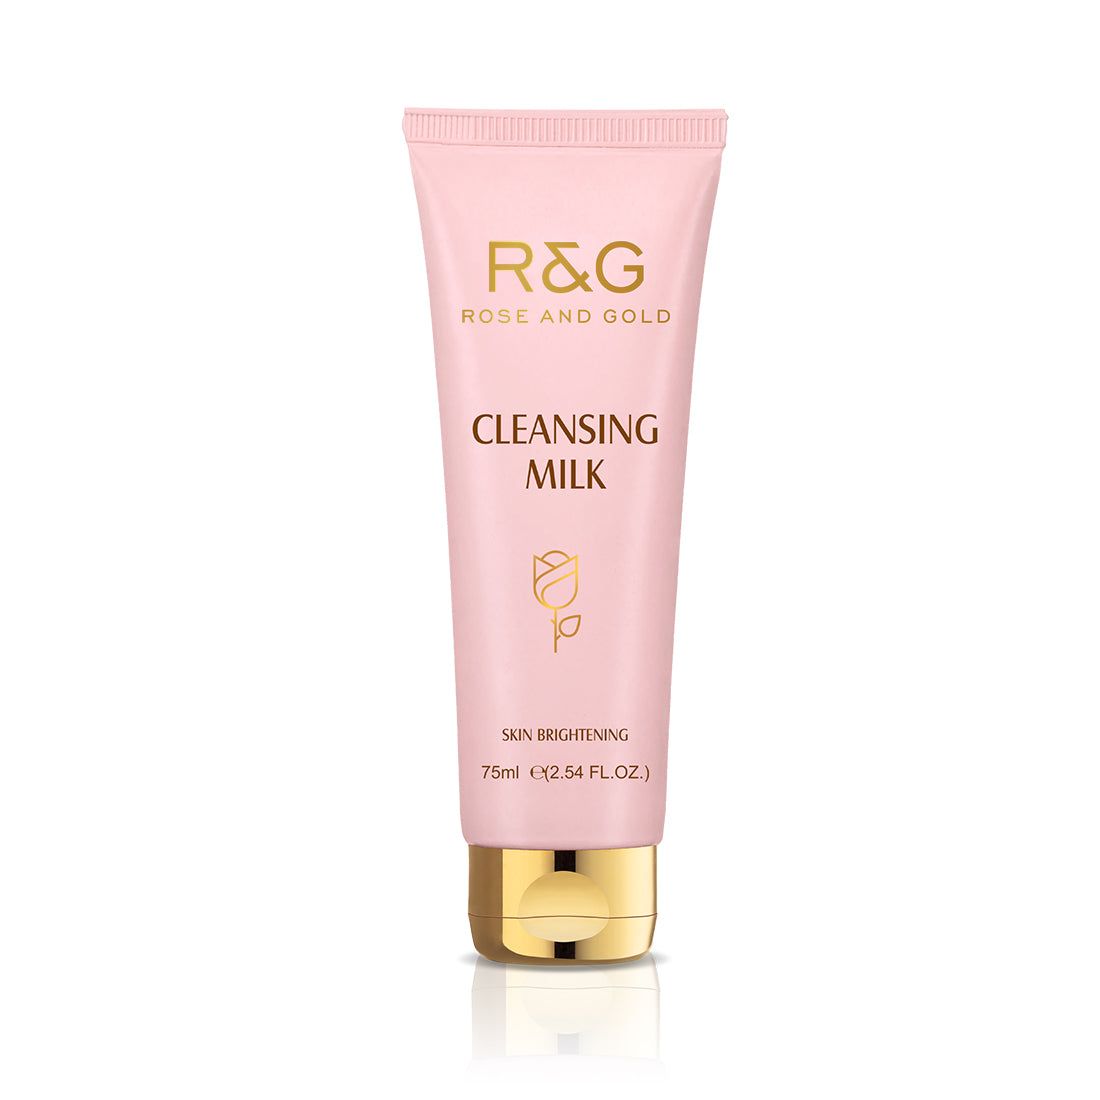 R&G Cleansing Milk For Skin Brightening - Fortified with Natural Oils - Helps to Maintain Natural Moisture Balance - Keeps Your Face Clean, Beautiful & Glowing - VasuStore